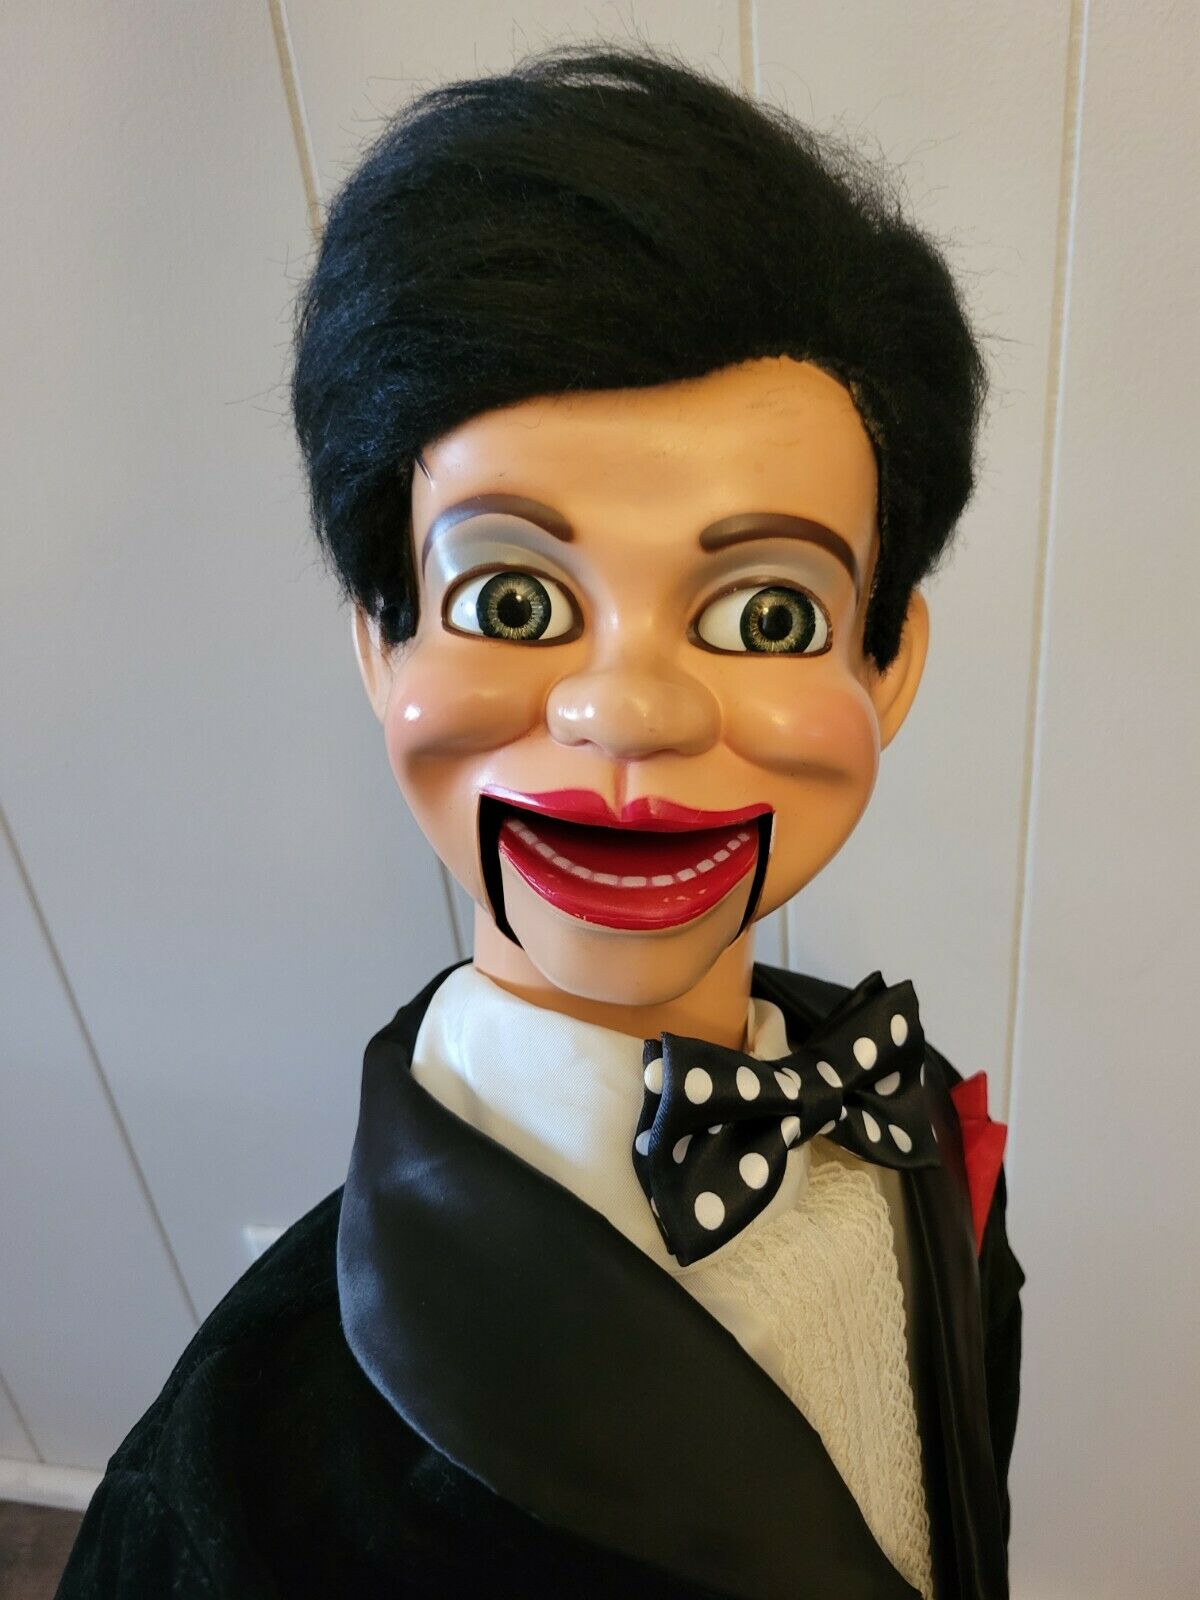 Jerry 'elvis' Mahoney Ventriloquist Dummy With *moving Eyes*